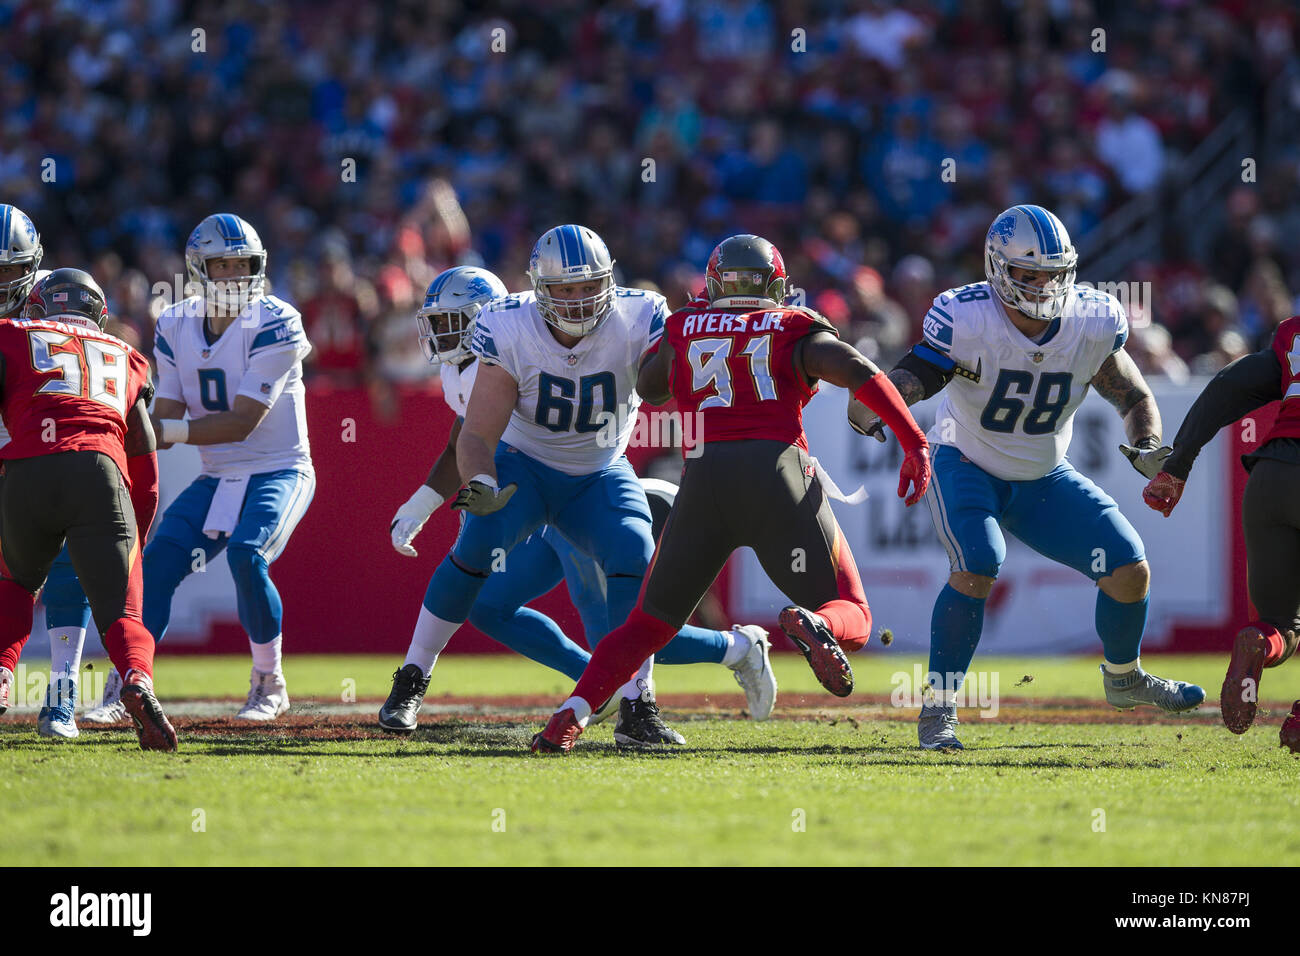 Tampa, Florida, USA. 10th Dec, 2017. Detroit Lions offensive guard Graham Glasgow (60) looks to block against Tampa Bay Buccaneers defensive end Robert Ayers (91) during the game on Sunday December 10, 2017 at Raymond James Stadium in Tampa, Florida. Credit: Travis Pendergrass/ZUMA Wire/Alamy Live News Stock Photo